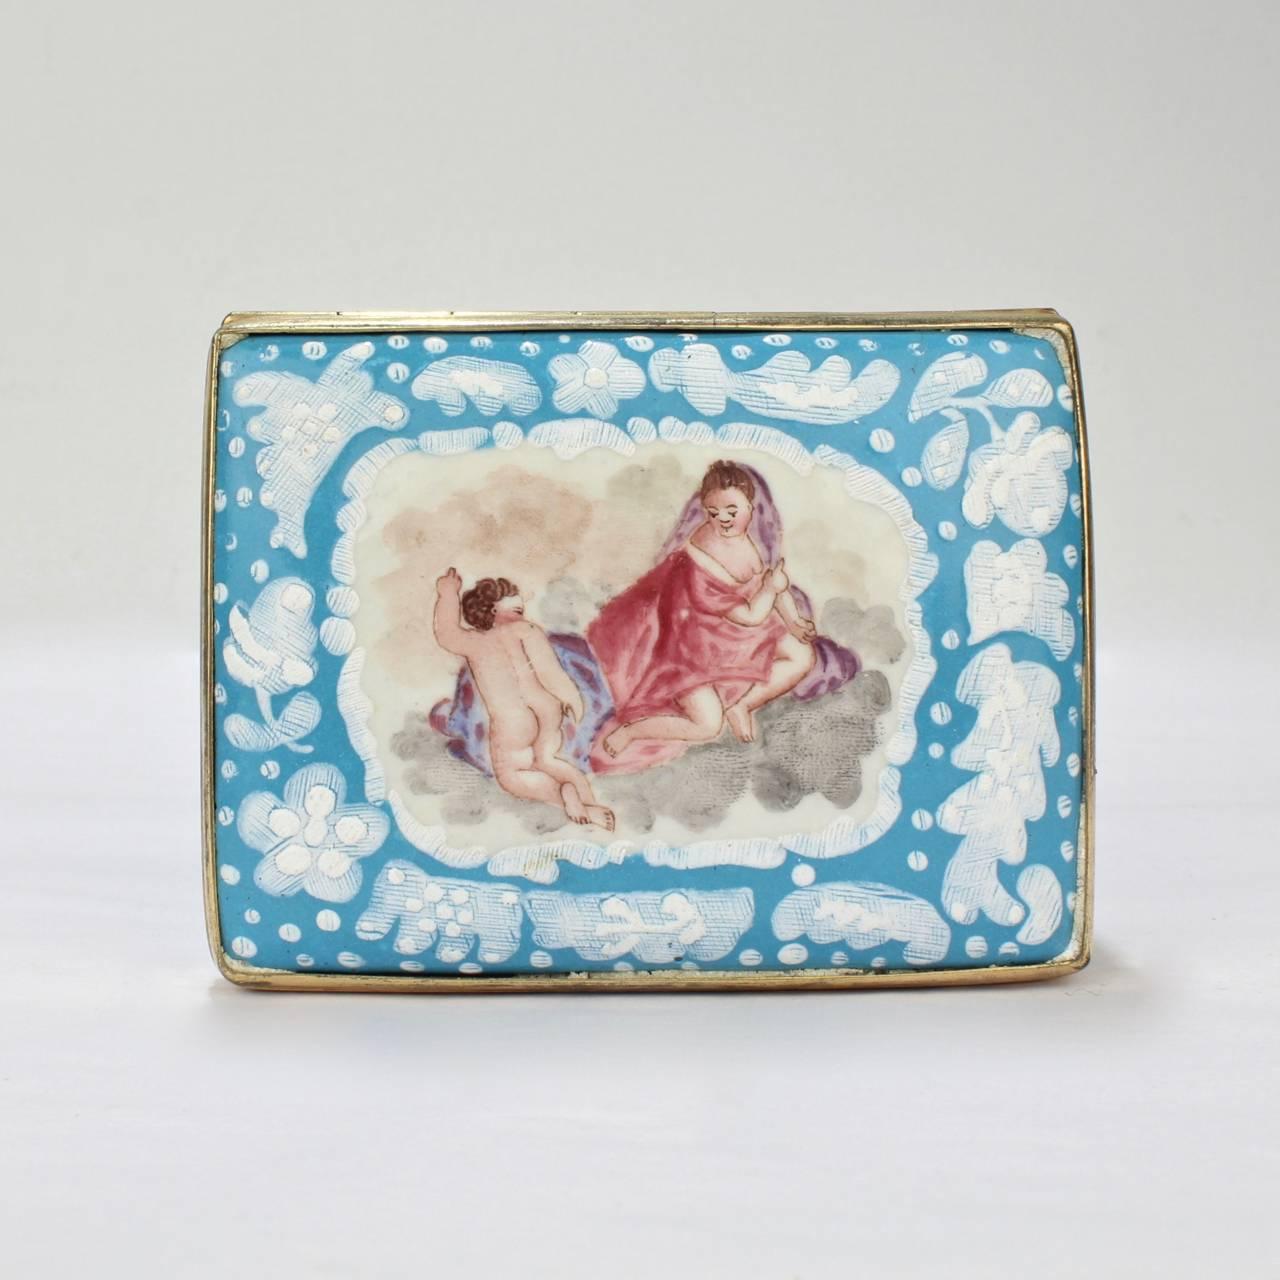 A fine antique English Battersea Bilston table snuff box.

The decoration includes cherubs to the lid and floral sprays to the sides of the boxes exterior. The exterior has a robin's egg blue ground and white highlights. The interior lid depicts a